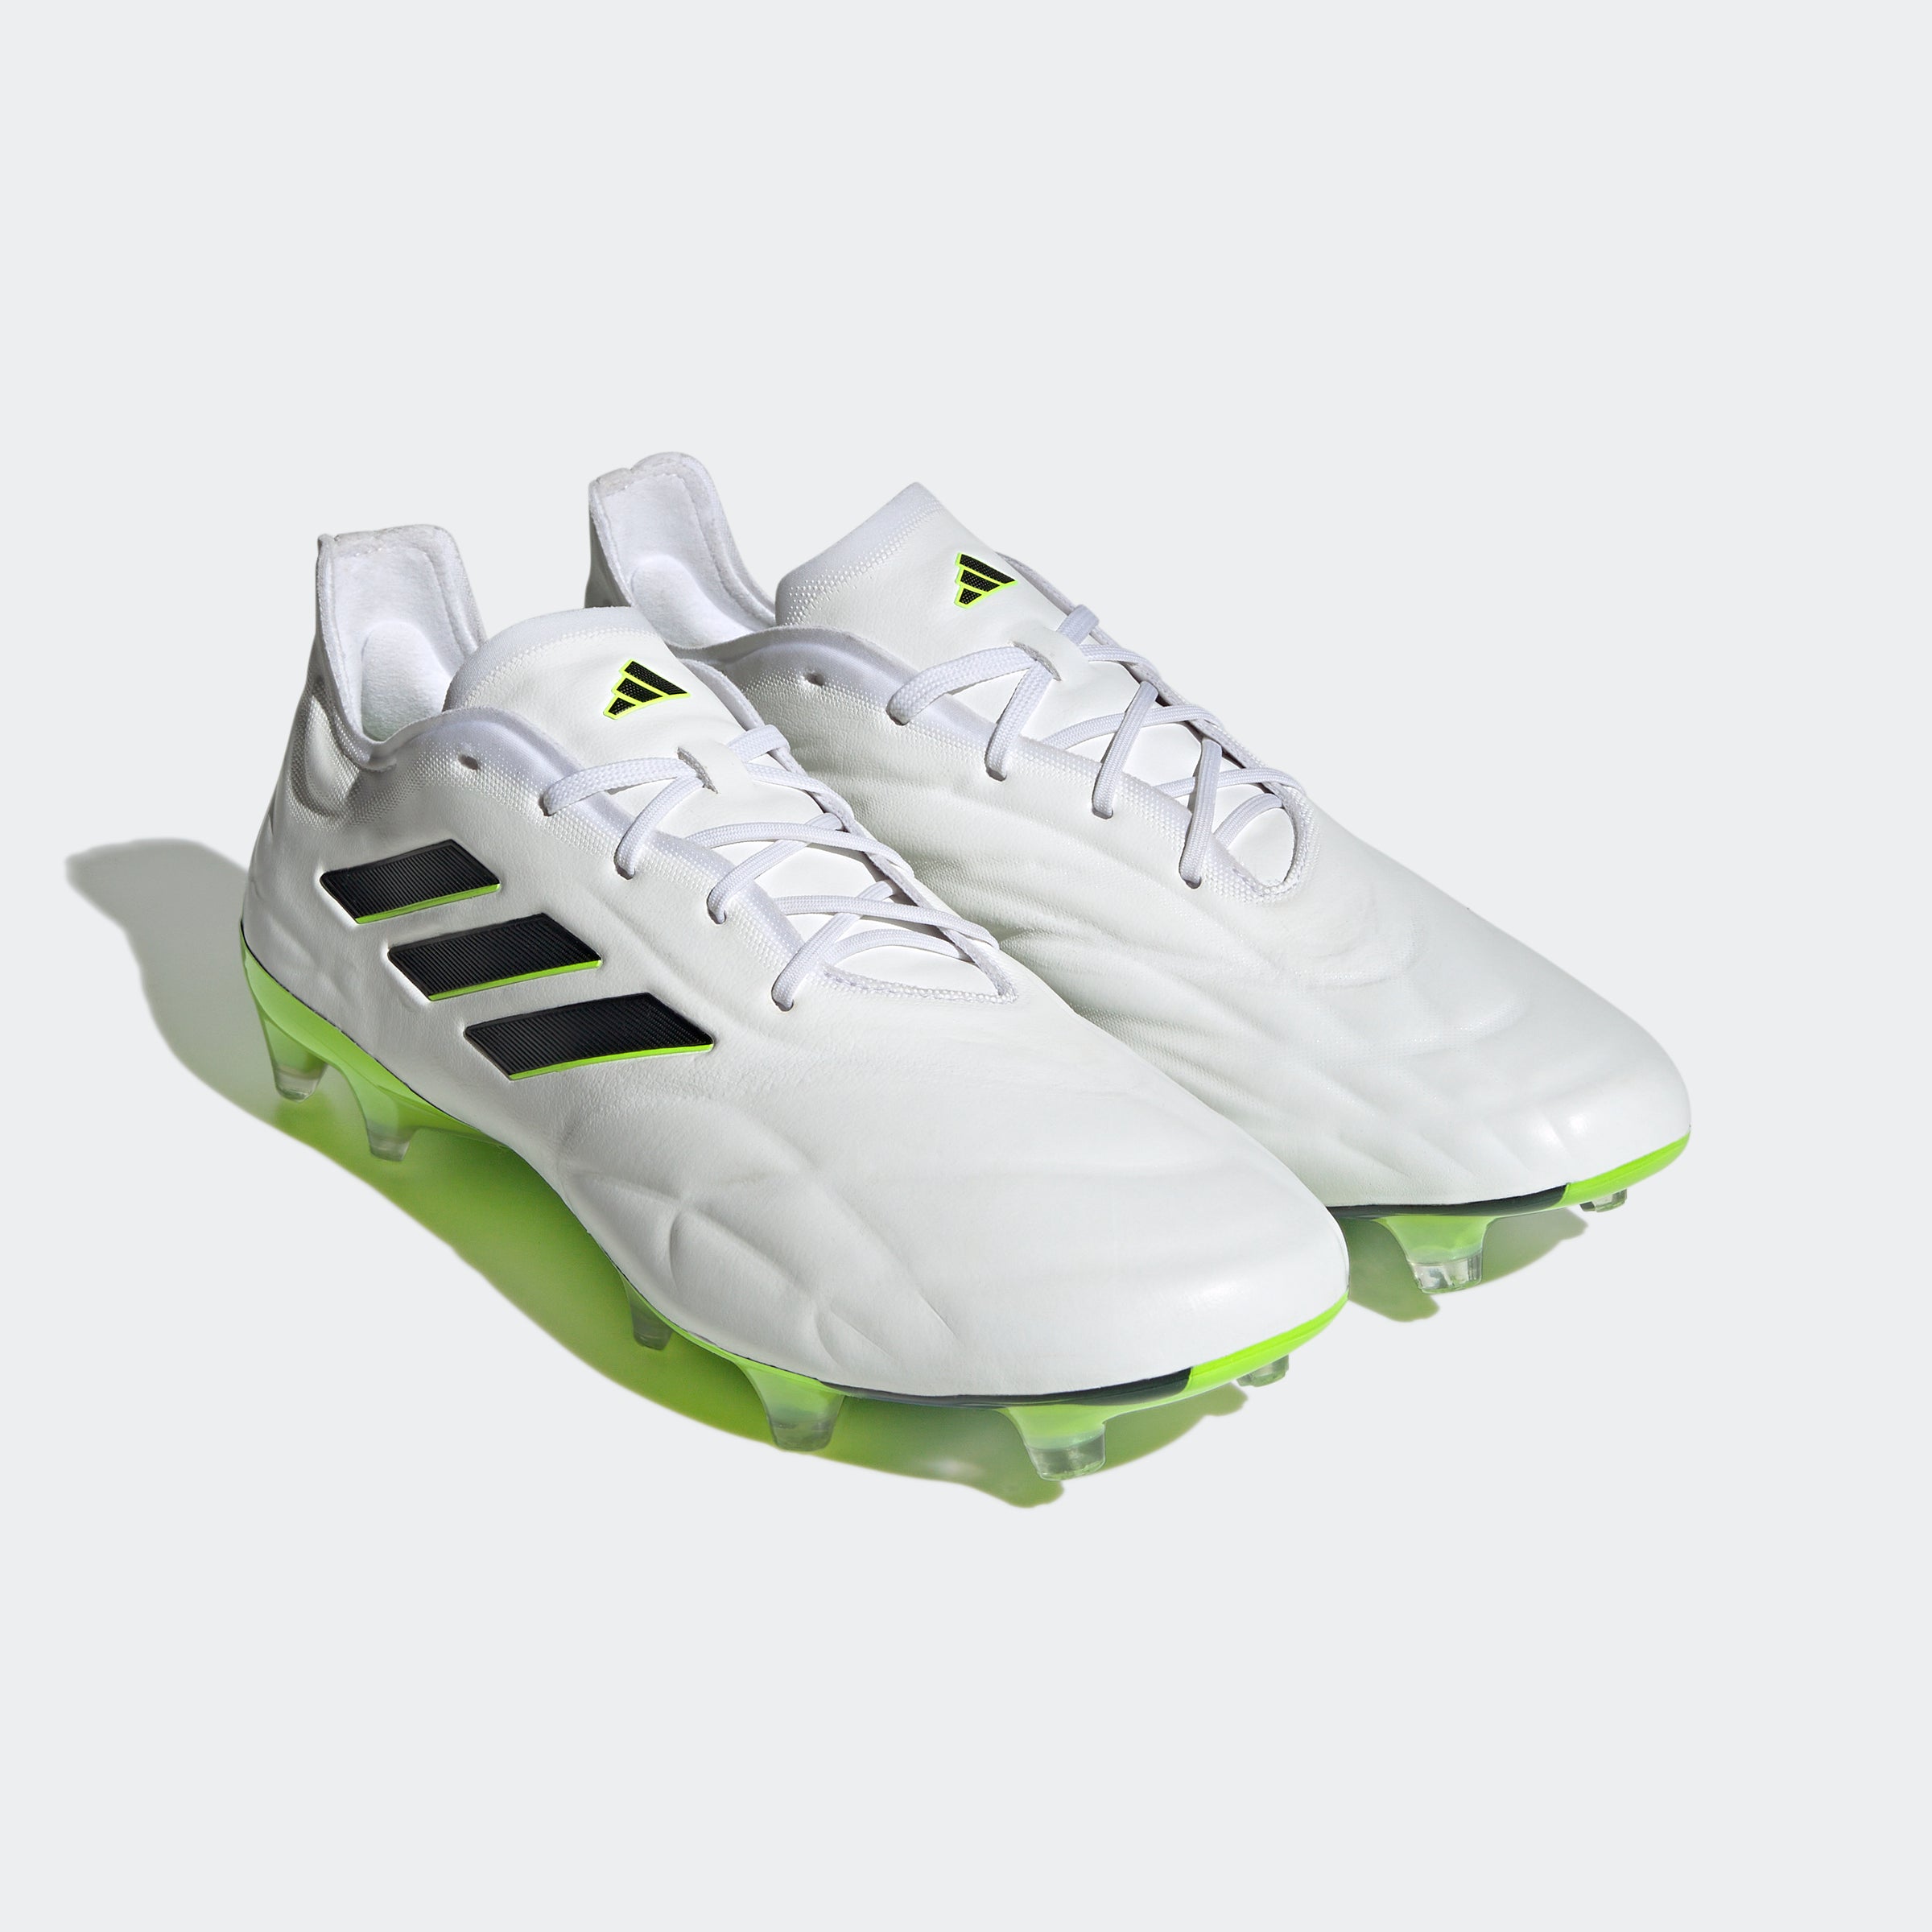 adidas Copa Pure.1 Firmground Soccer Cleats - Niky's Sports